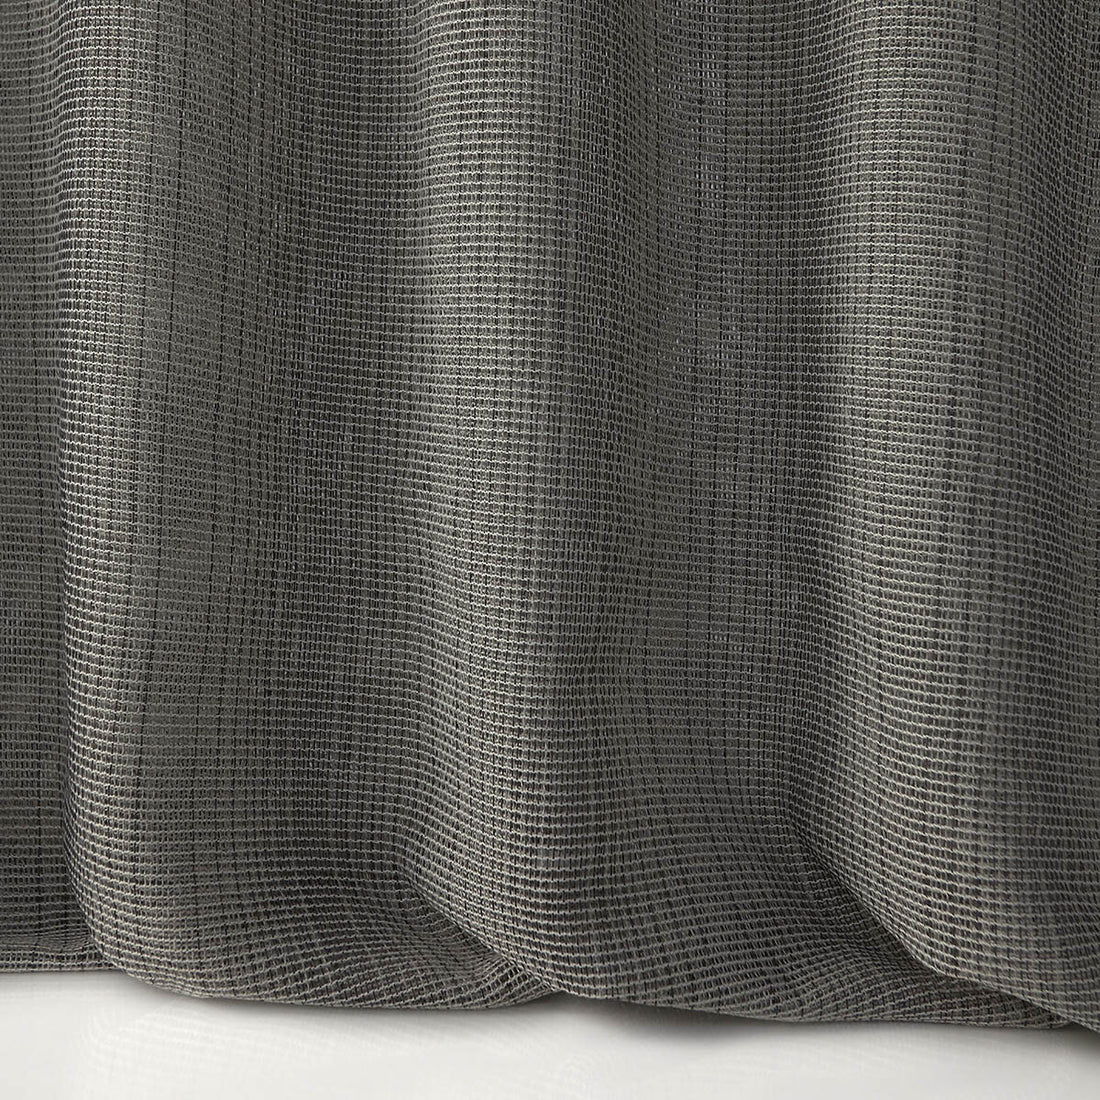 Aalto fabric in 9 color - pattern LZ-30337.09.0 - by Kravet Design in the Lizzo collection